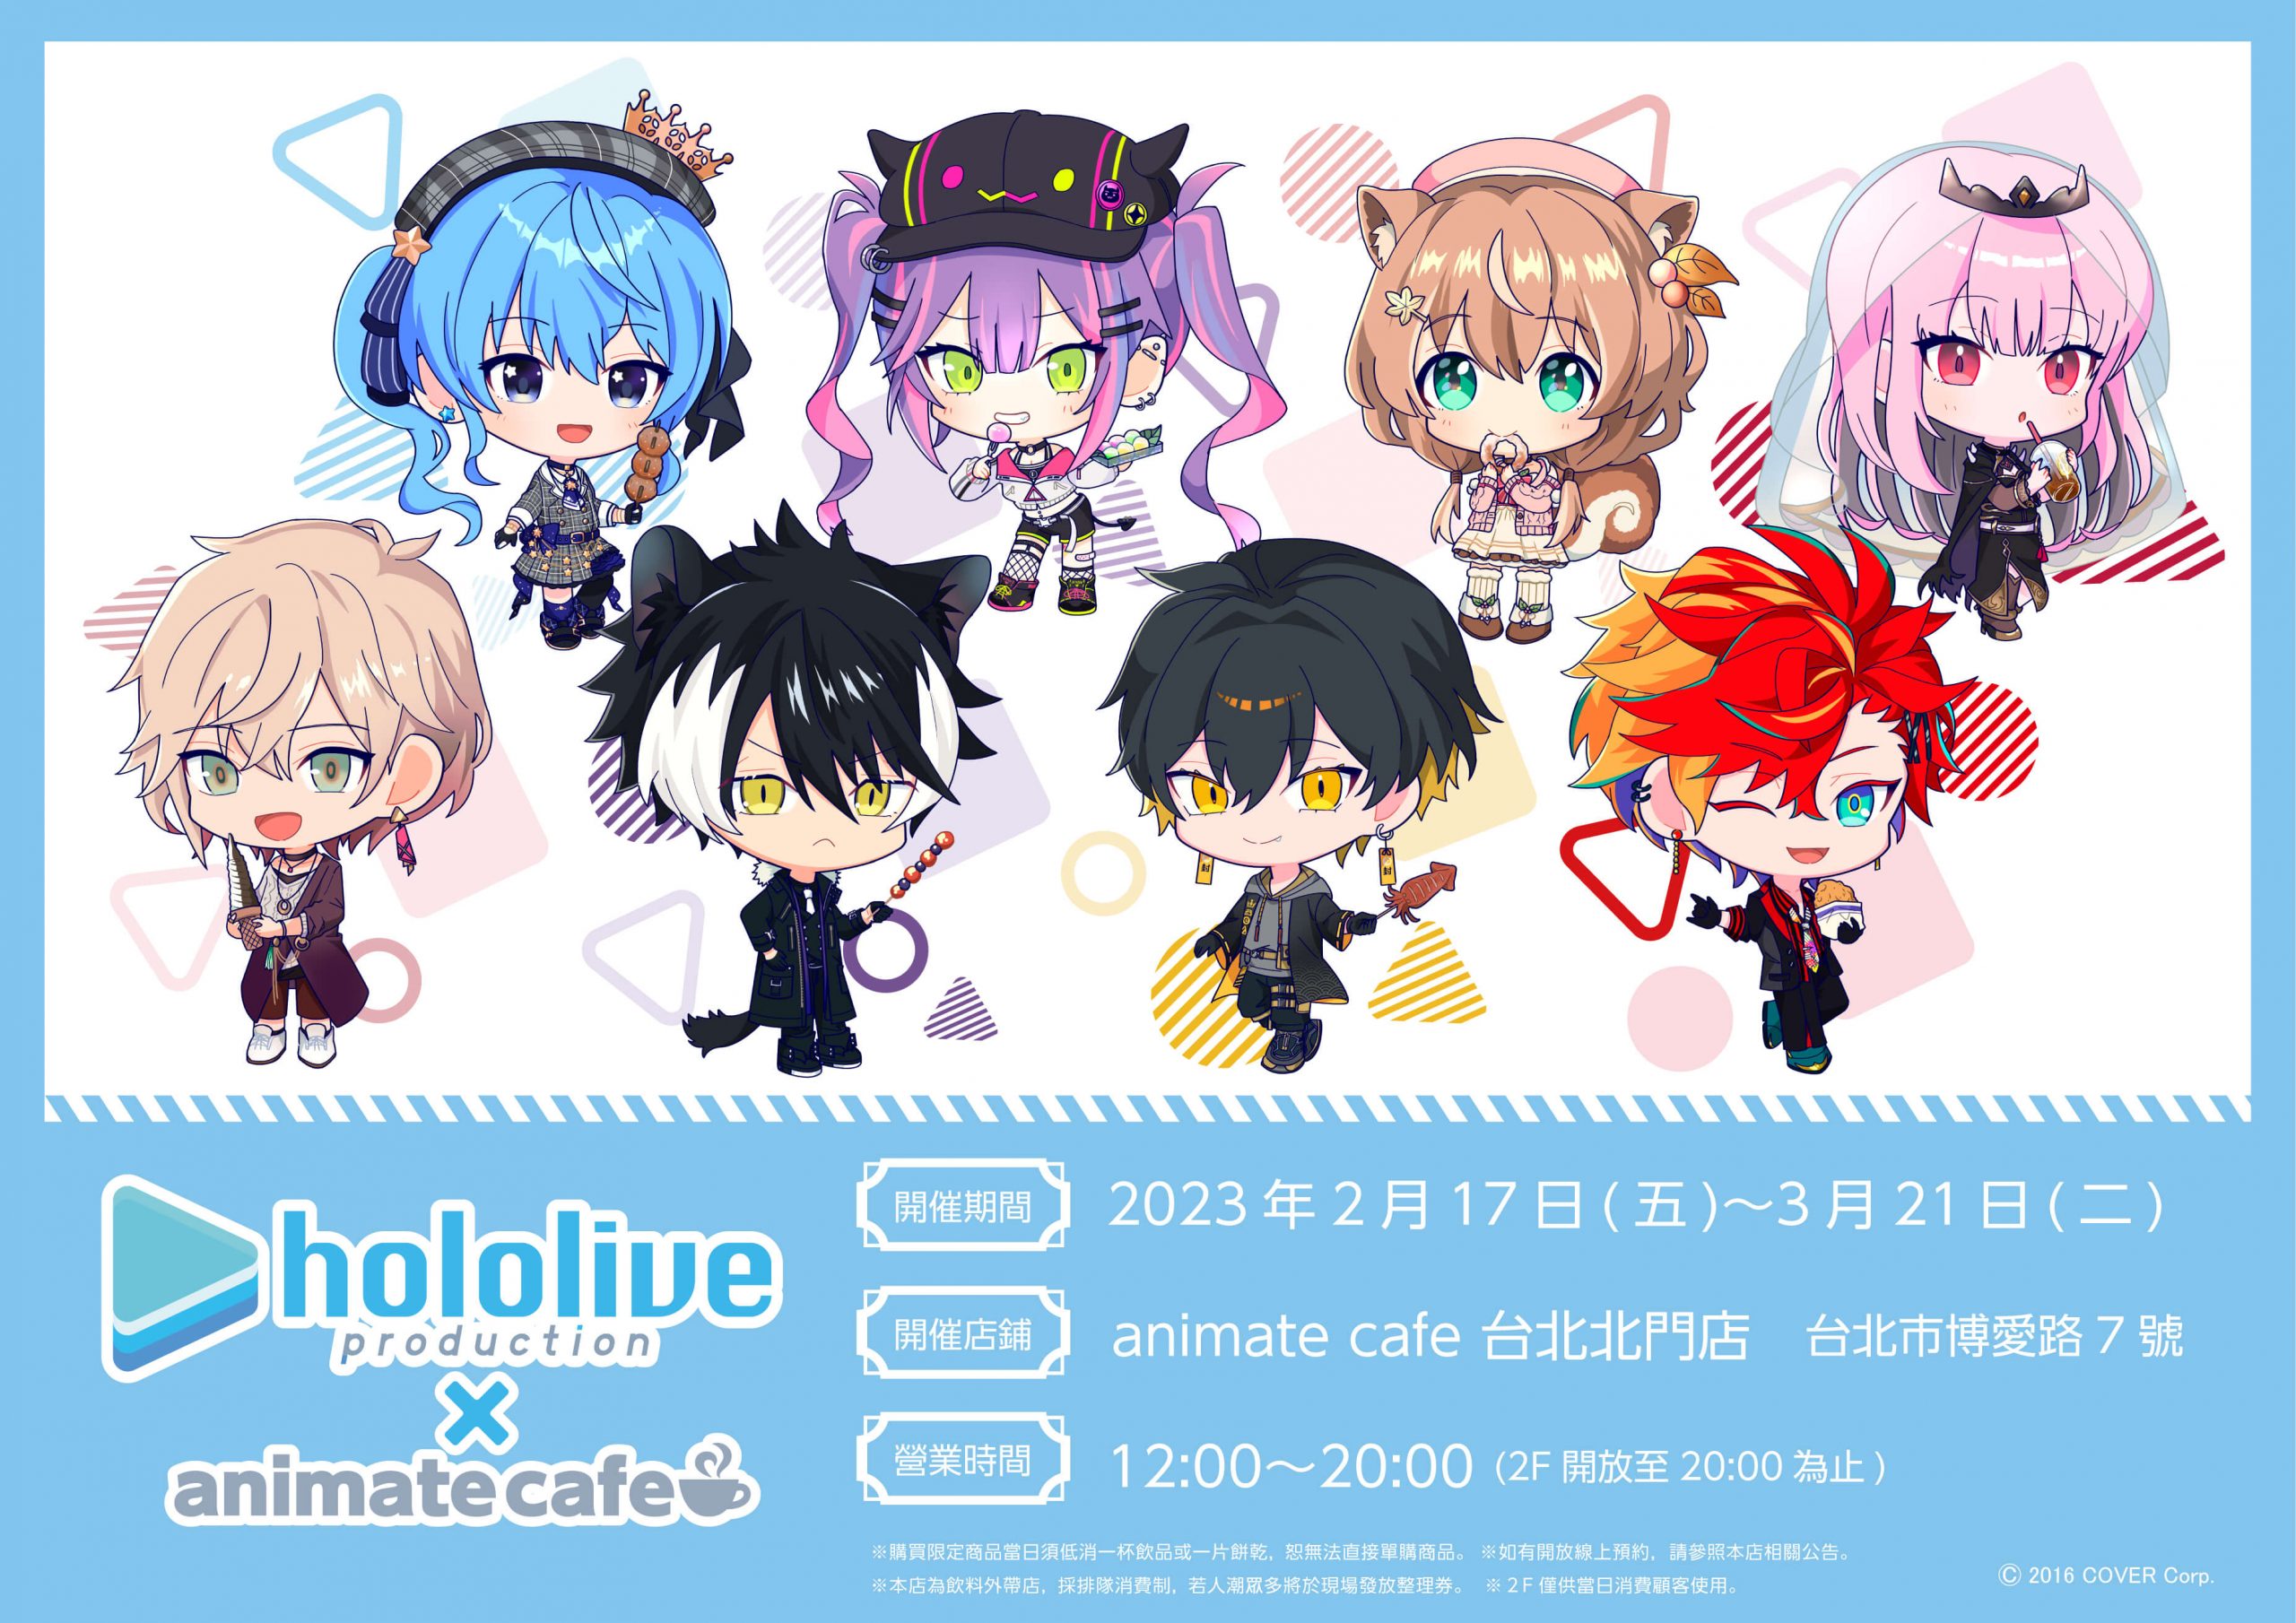 hololive production x animate cafe Collaboration Café Opens in Taiwan From February 17th!